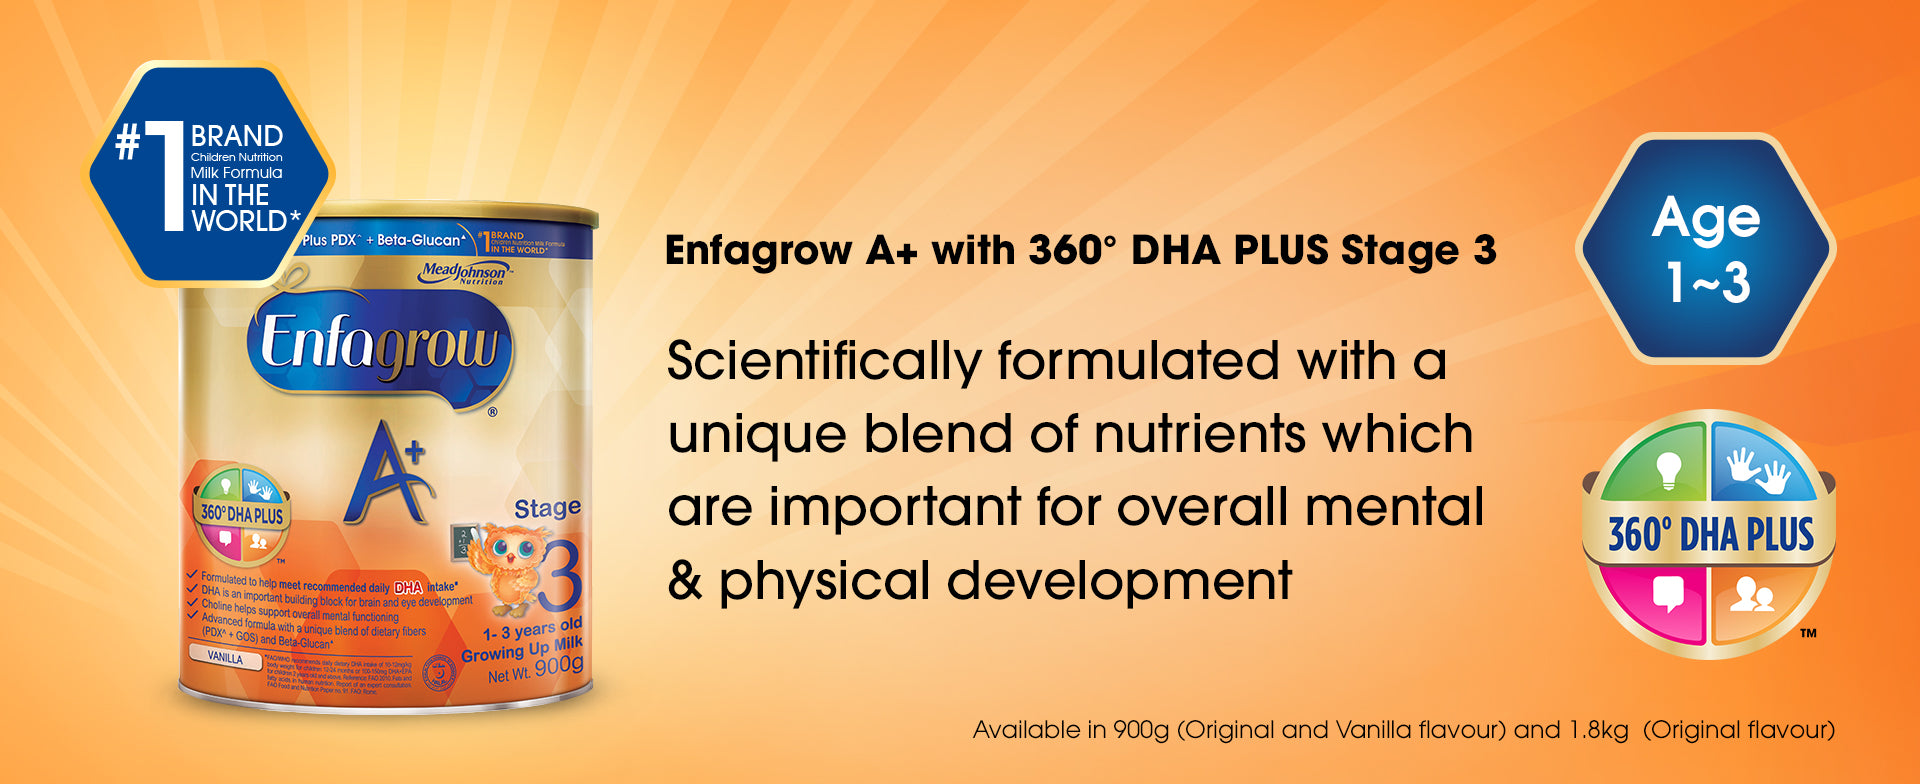 Enfagrow A+ with 360 degrees DHA PLUS Stage 3 - a product banner image with basic information